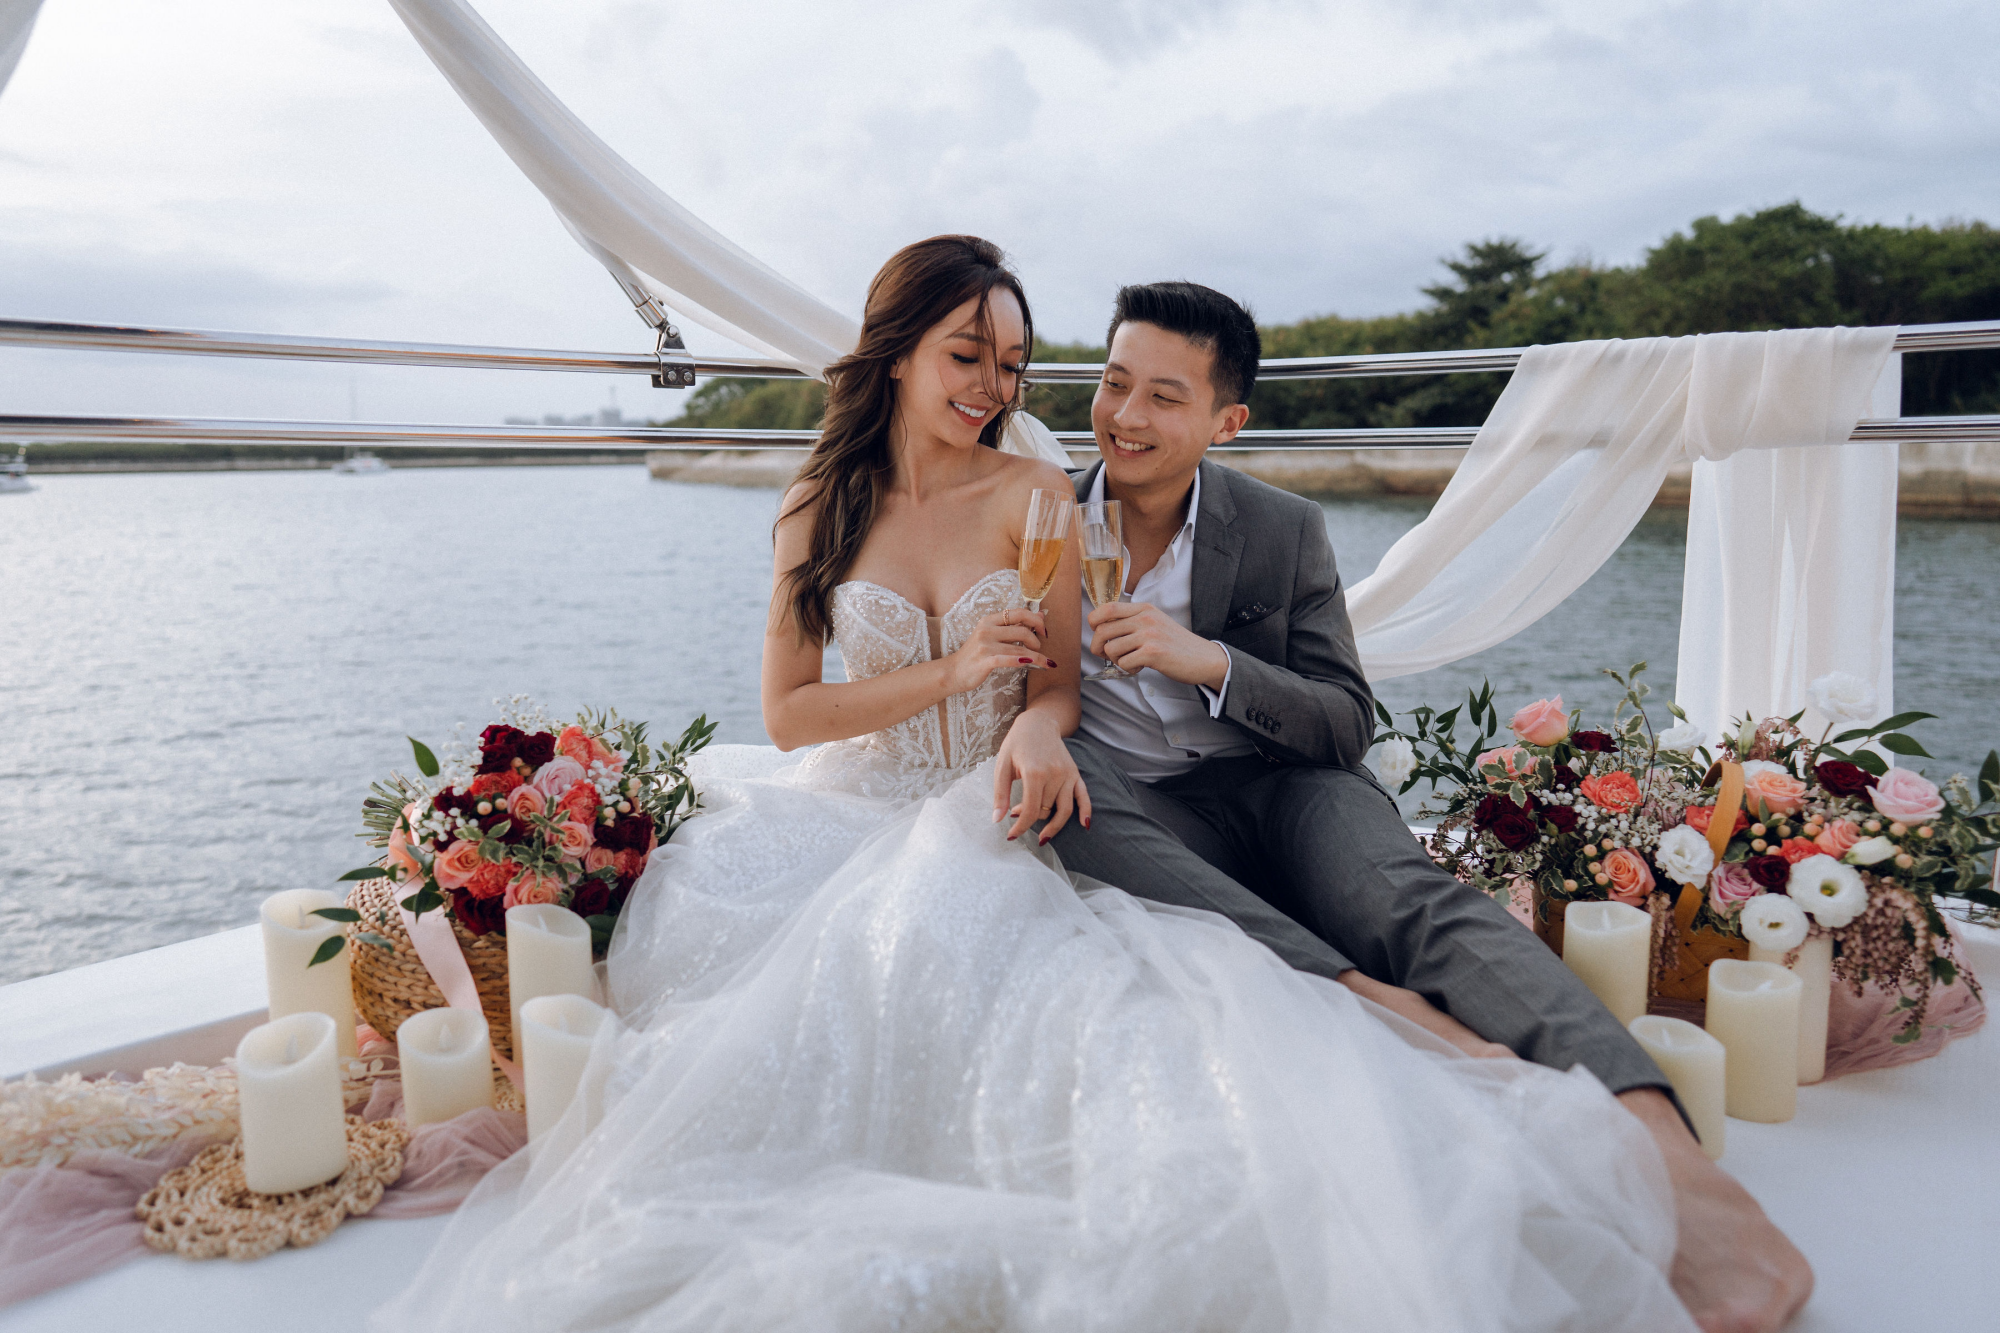 Sunset Prewedding Photoshoot On A Yacht With Romantic Floral Styling by Samantha on OneThreeOneFour 17